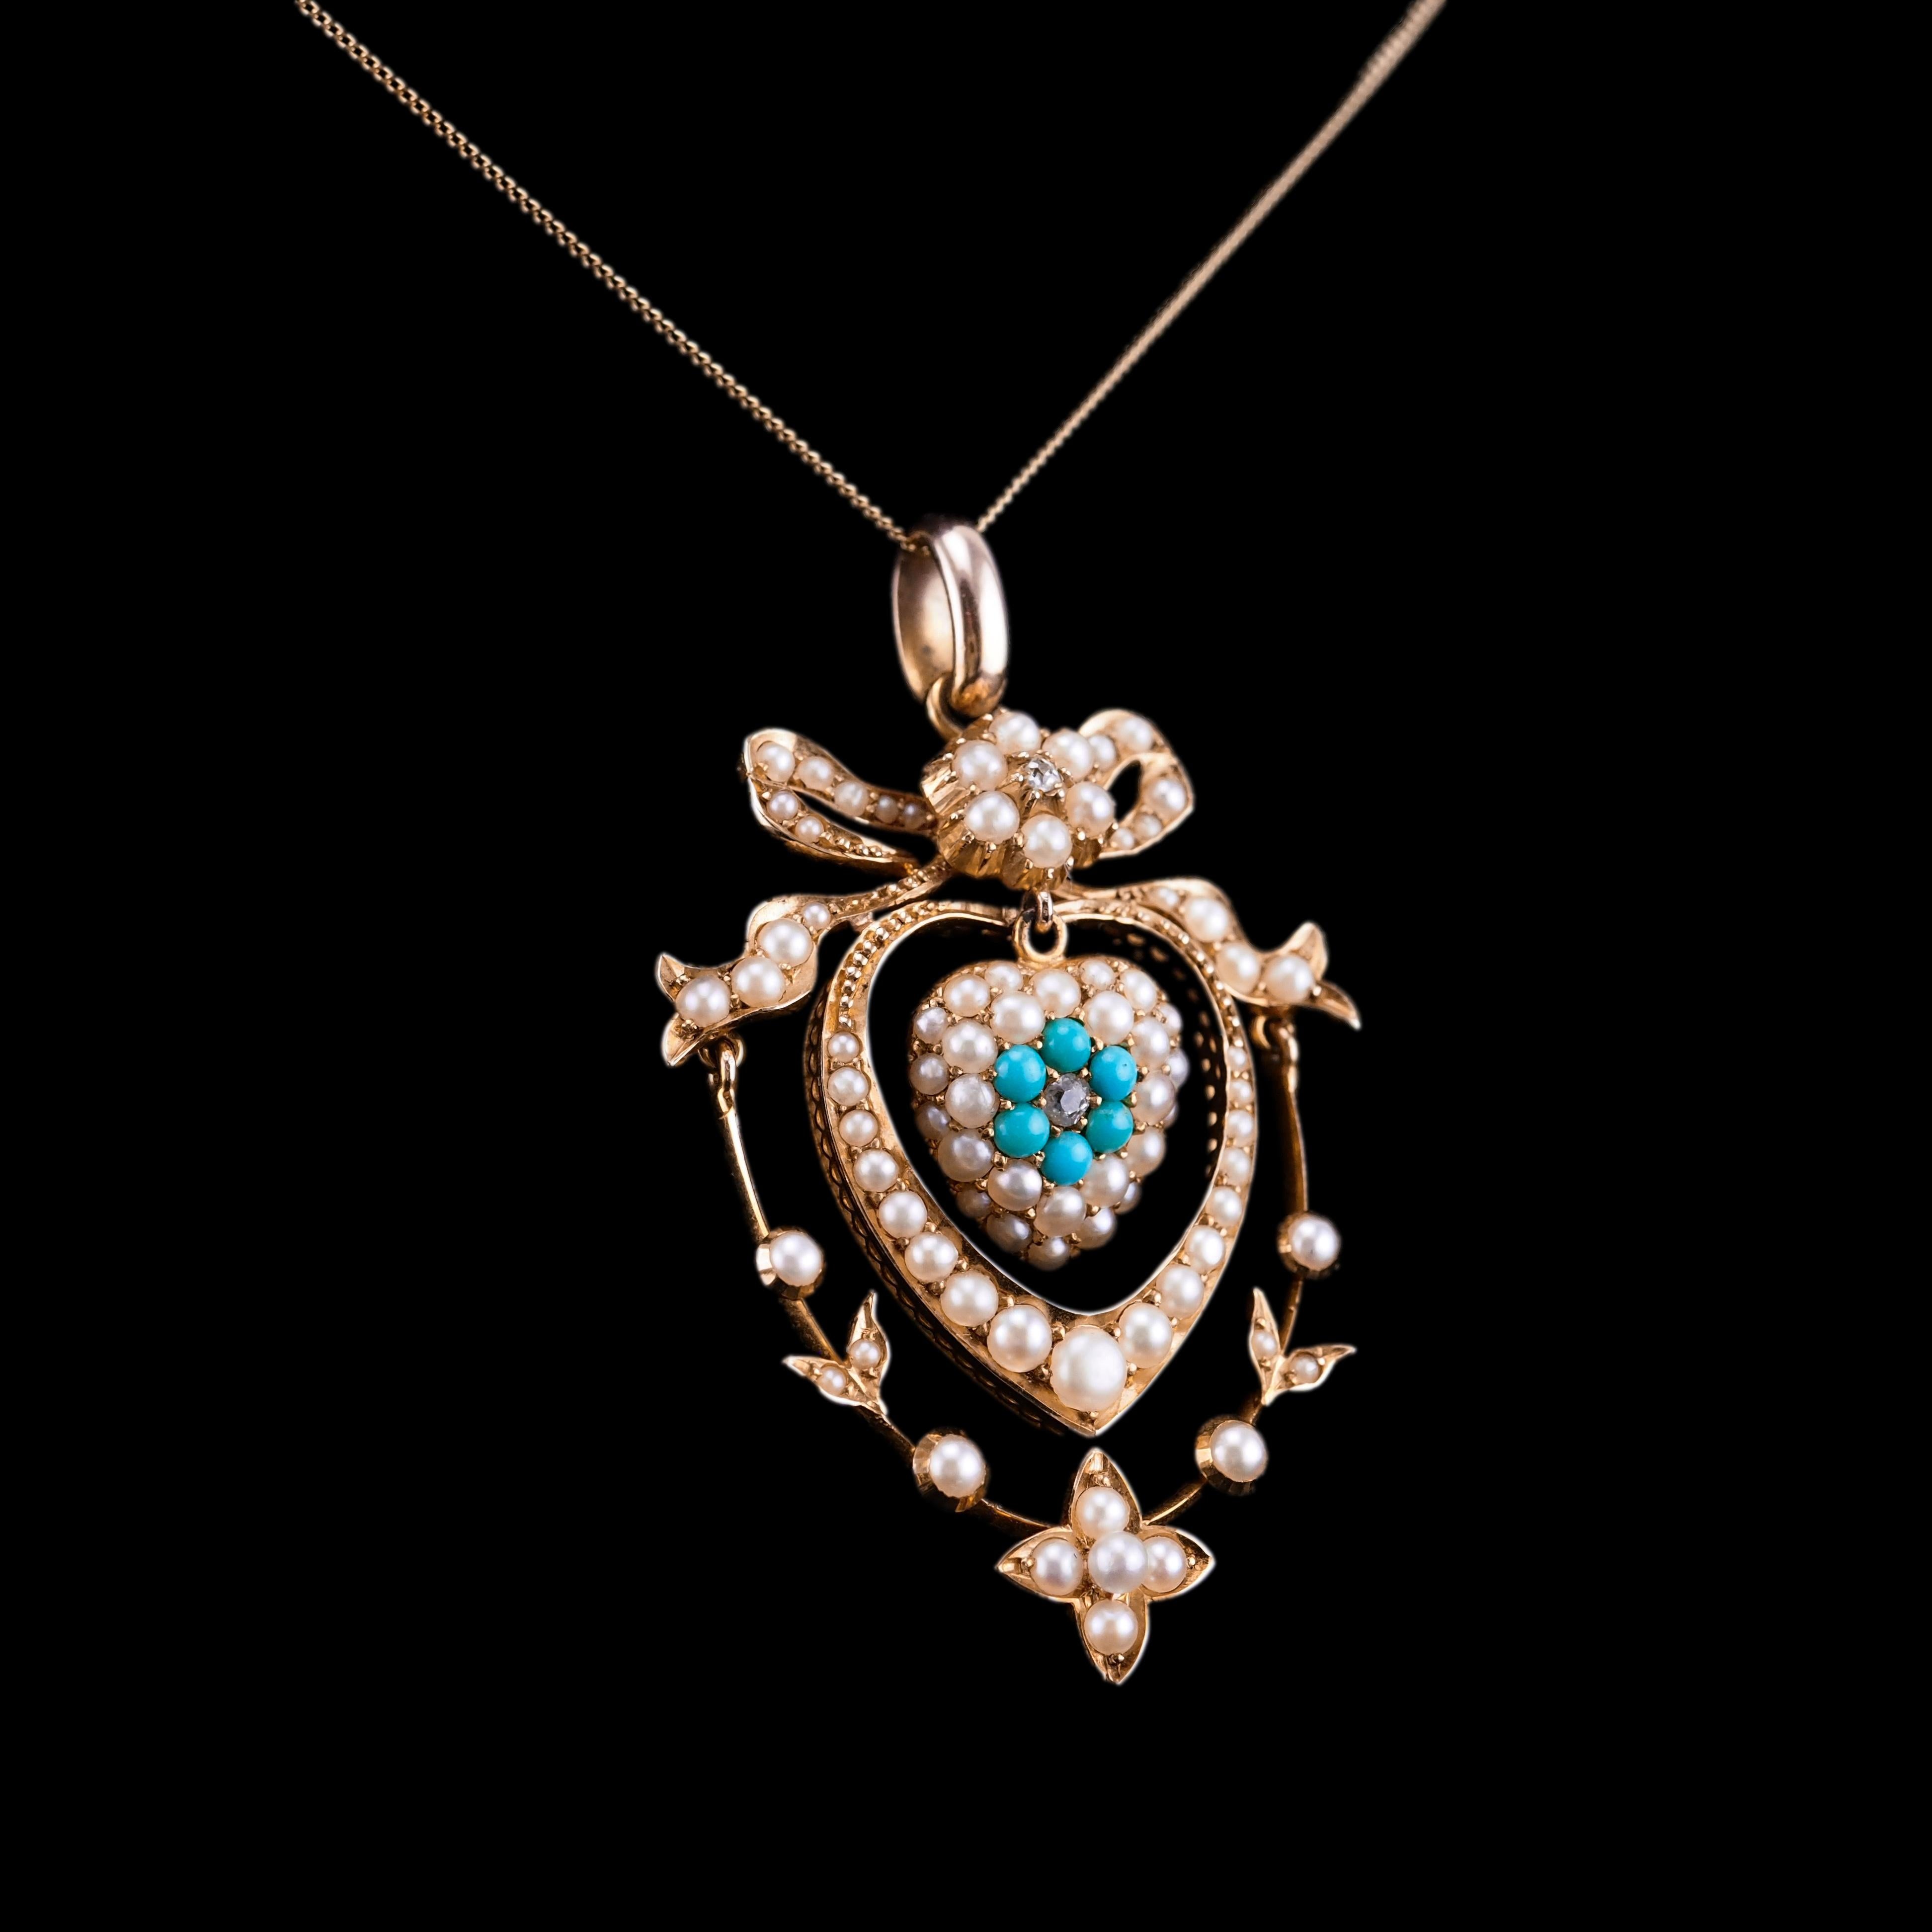 Antique Edwardian 15K Gold Turquoise Diamond & Seed Pearl Pendant Necklace c1910 For Sale 8